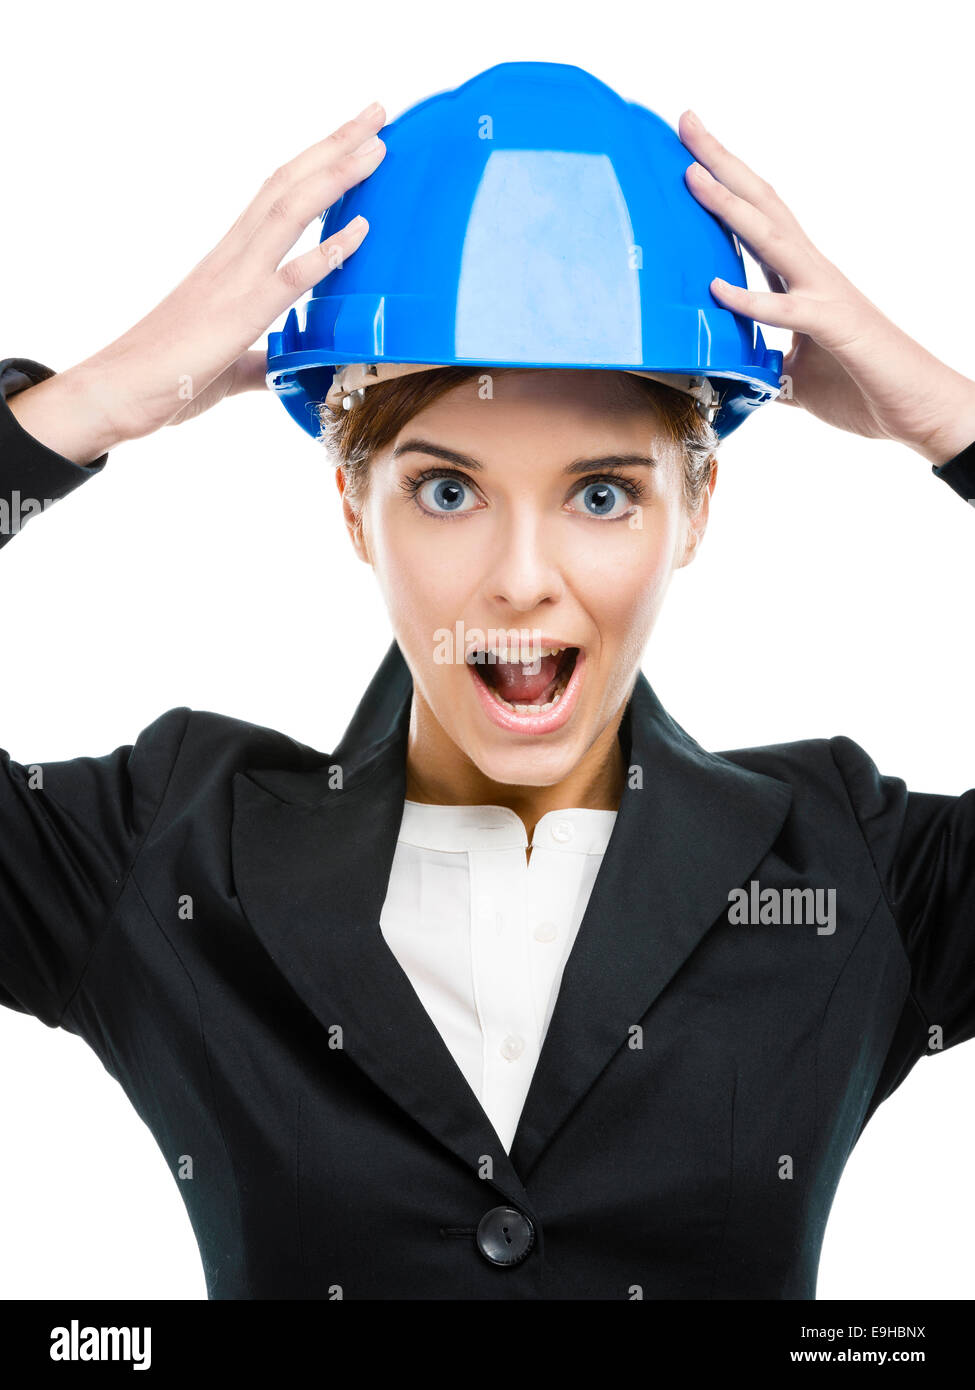 Fuuny portrait of young female engineer with hands holding a blue helmet Stock Photo